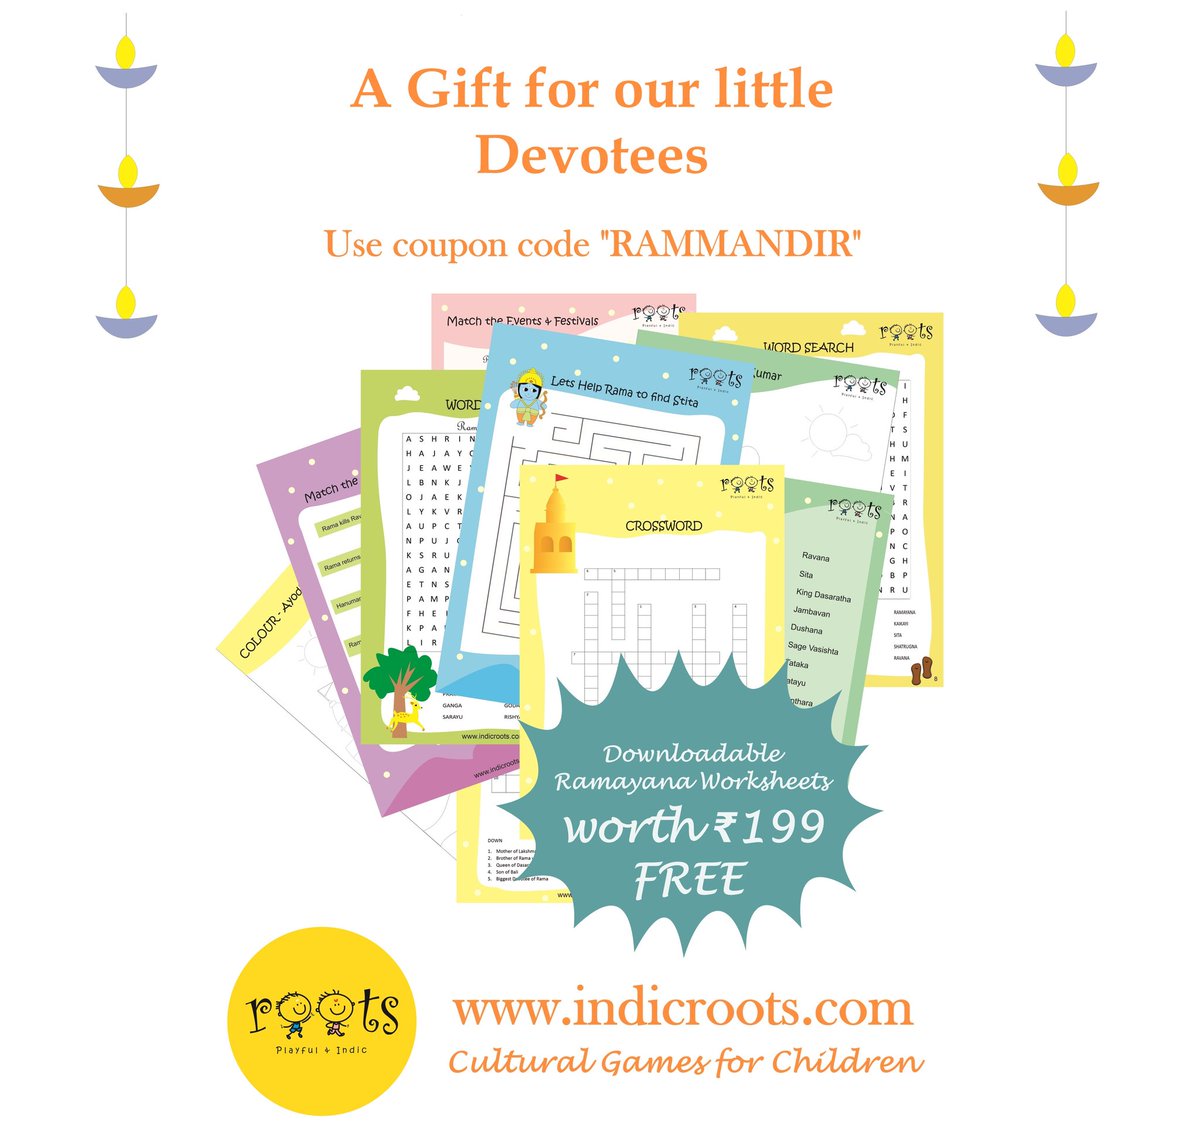 On the auspicious occasion of 'Ram Mandir Nirman,' here's a small gift from ROOTS to all little devotees! Use Coupon code 'RAMMANDIR' to get these beautiful downloadable Ramayana worksheets for free. No min order Link to order indicroots.com/shop/worksheet… #RamMandir @MinOfCultureGoI